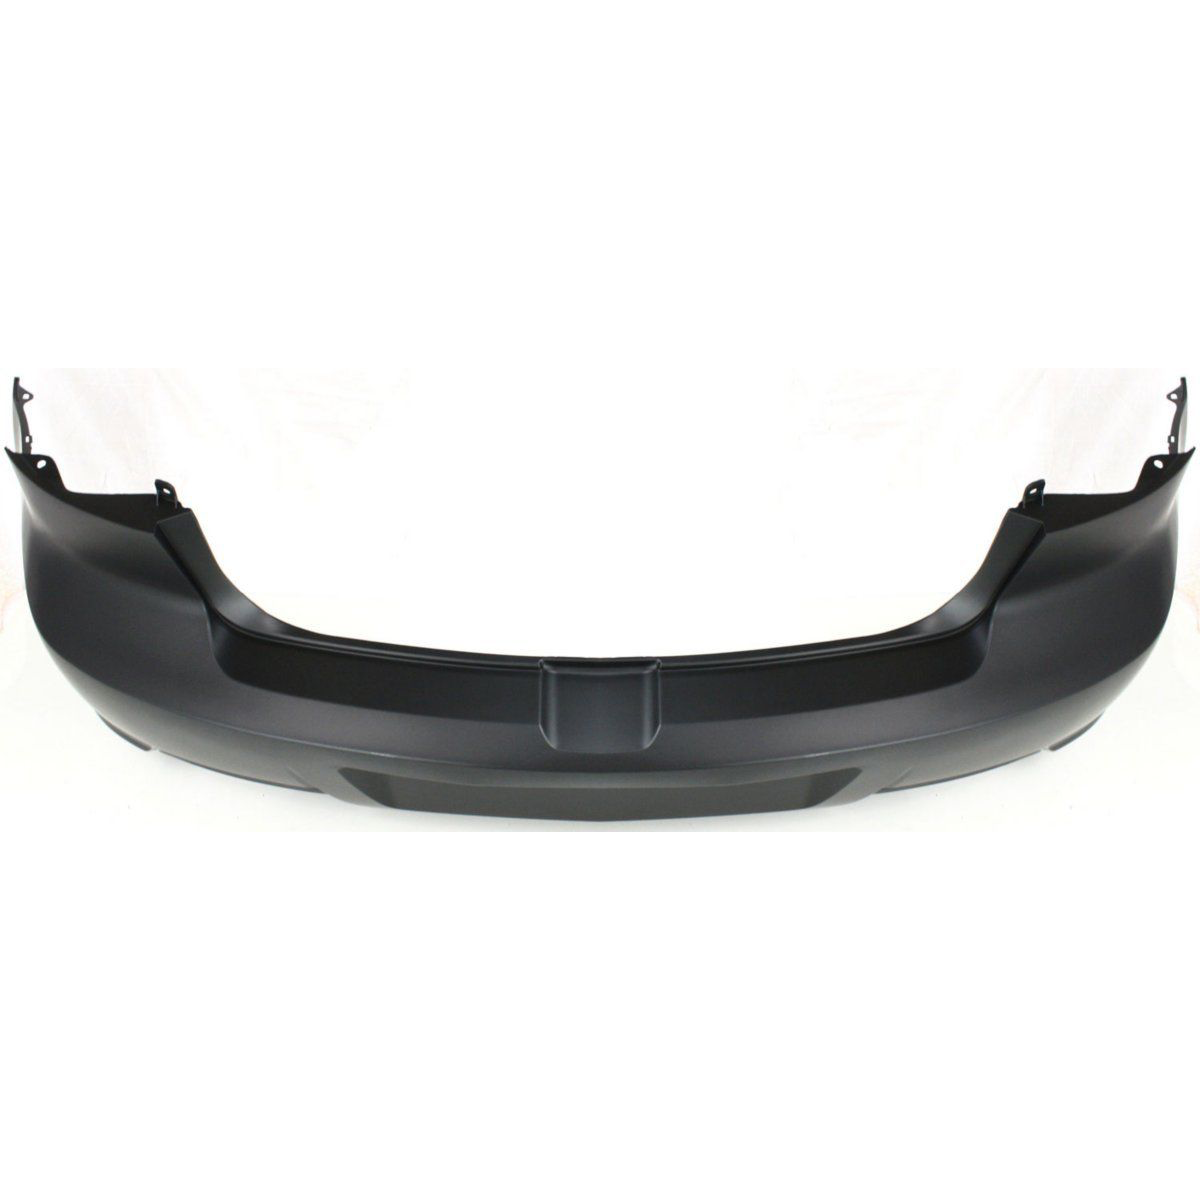 2007-2009 MAZDA 3 Rear Bumper Cover 4dr sedan Painted to Match